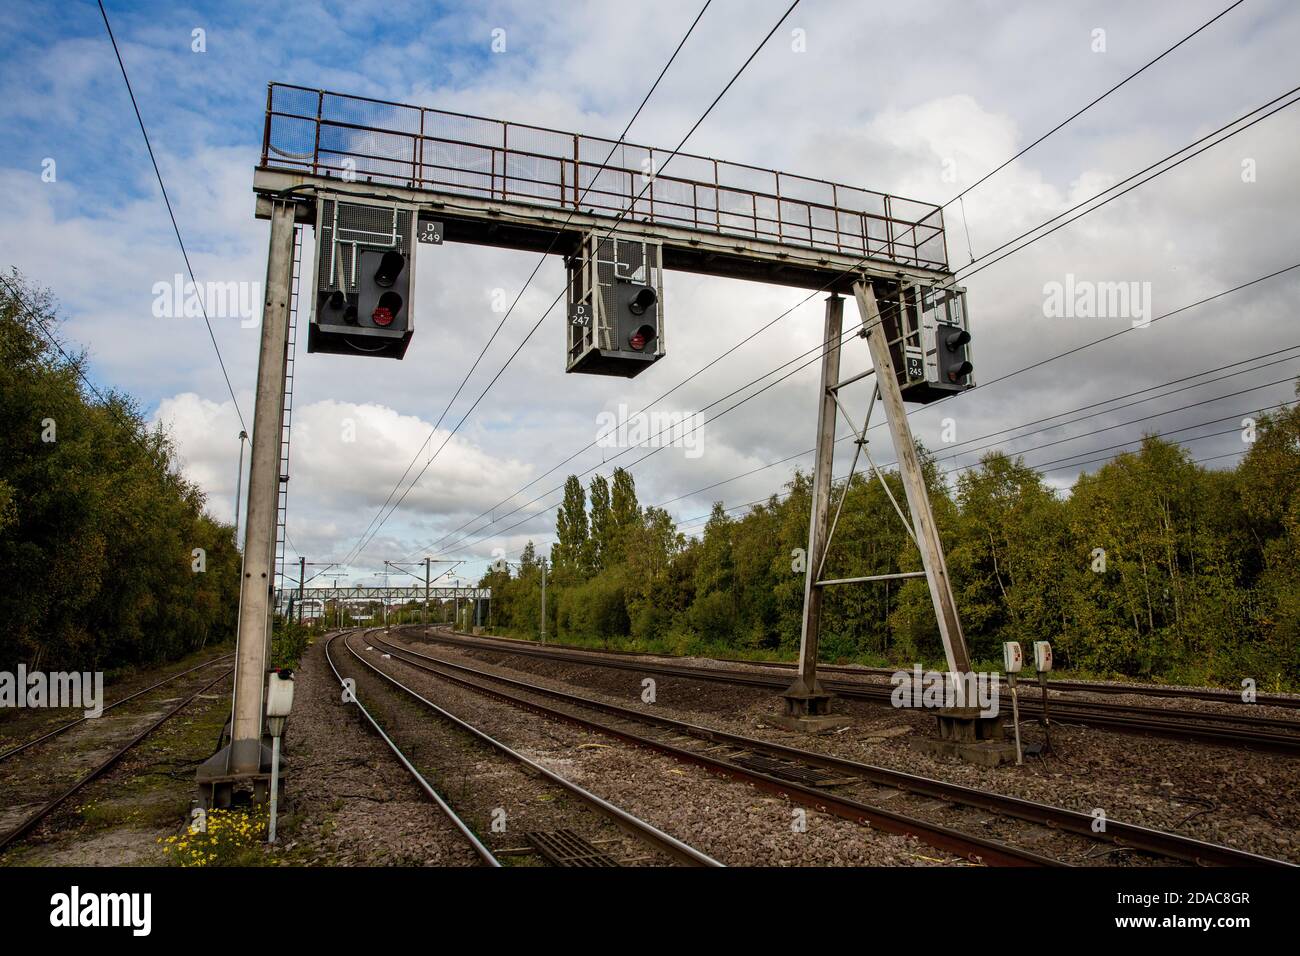 A row of overhead and gantry railway signals that control the movement of trains On UK electrified railway Stock Photo